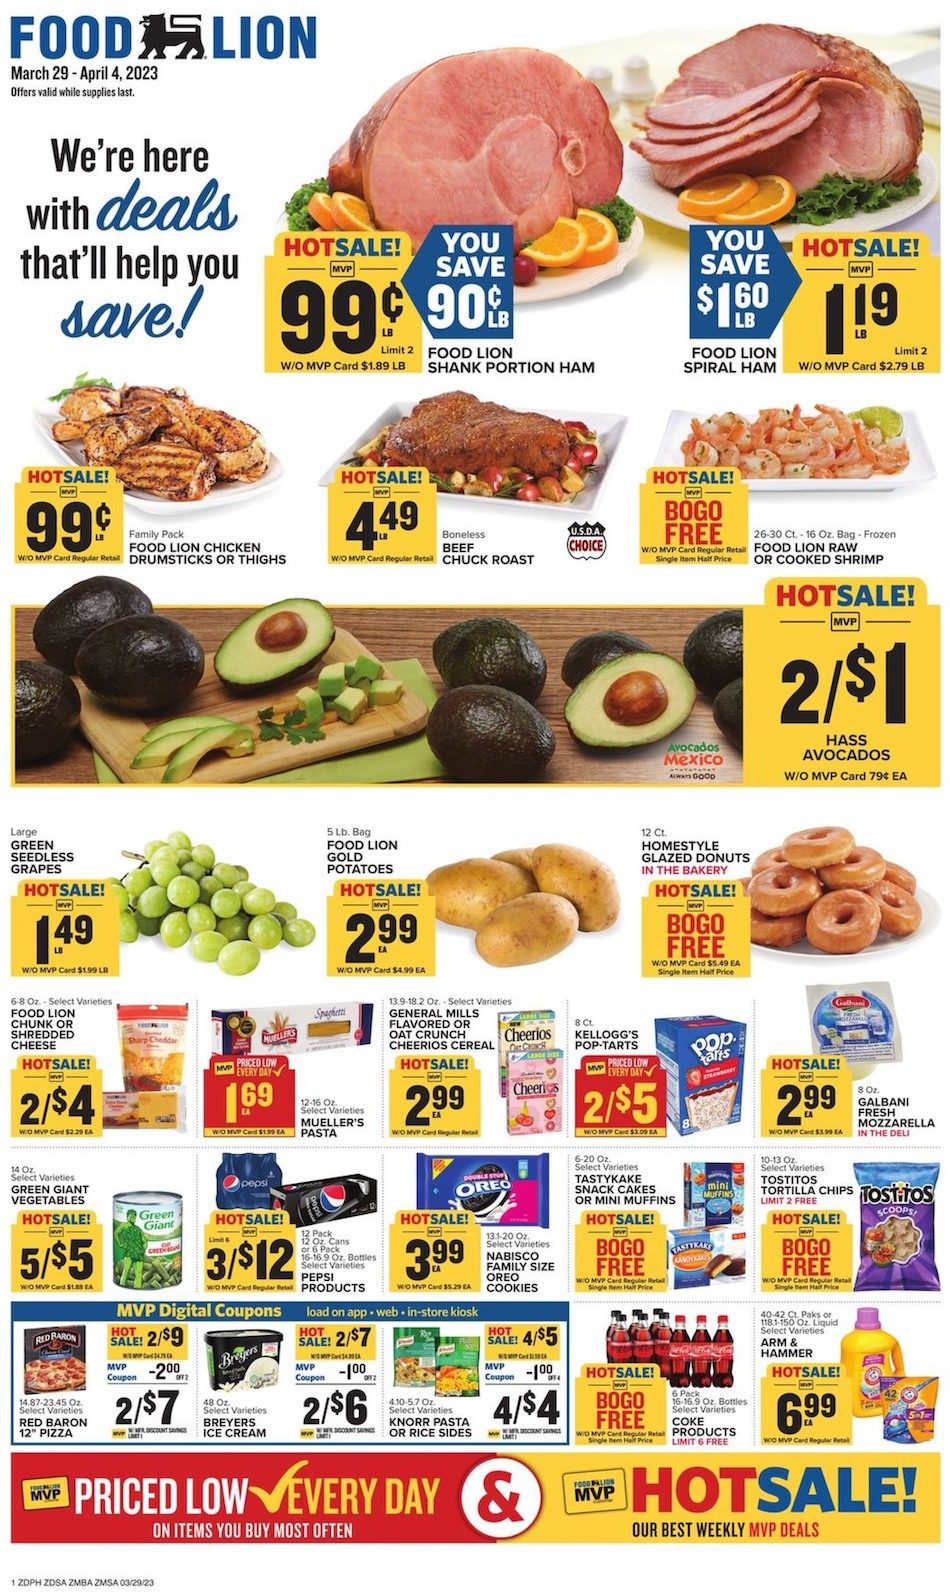 Food Lion Weekly Ad Sale 29th March – 4th April 2023 Page 1